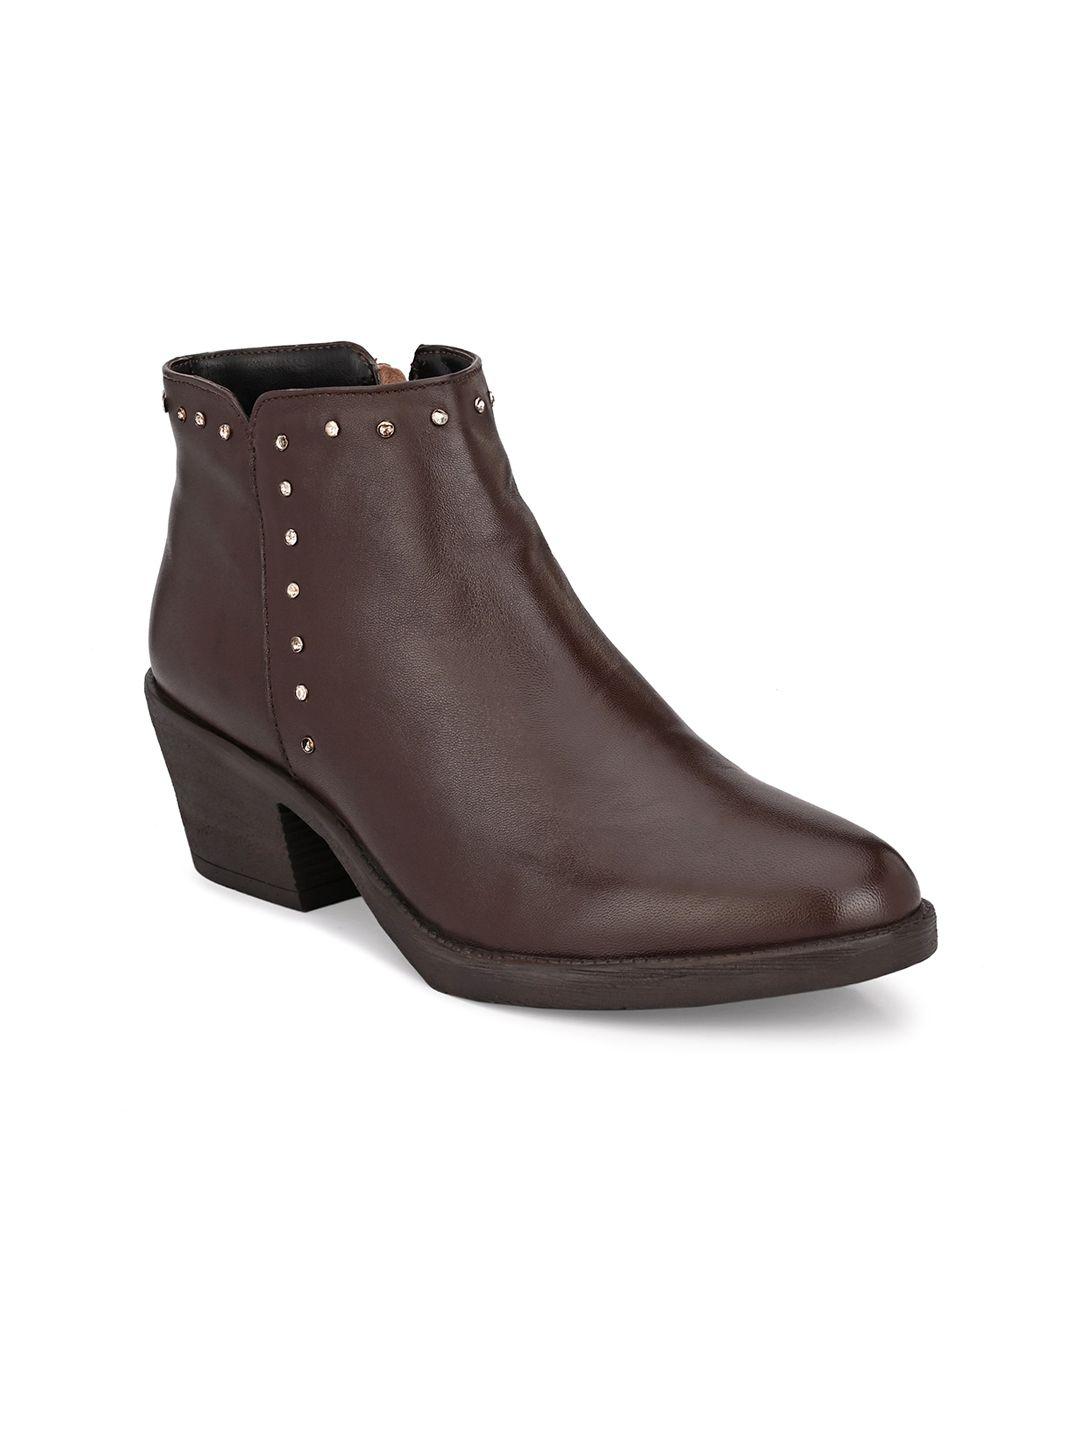 carlo romano by wasan shoes women brown leather flat boots